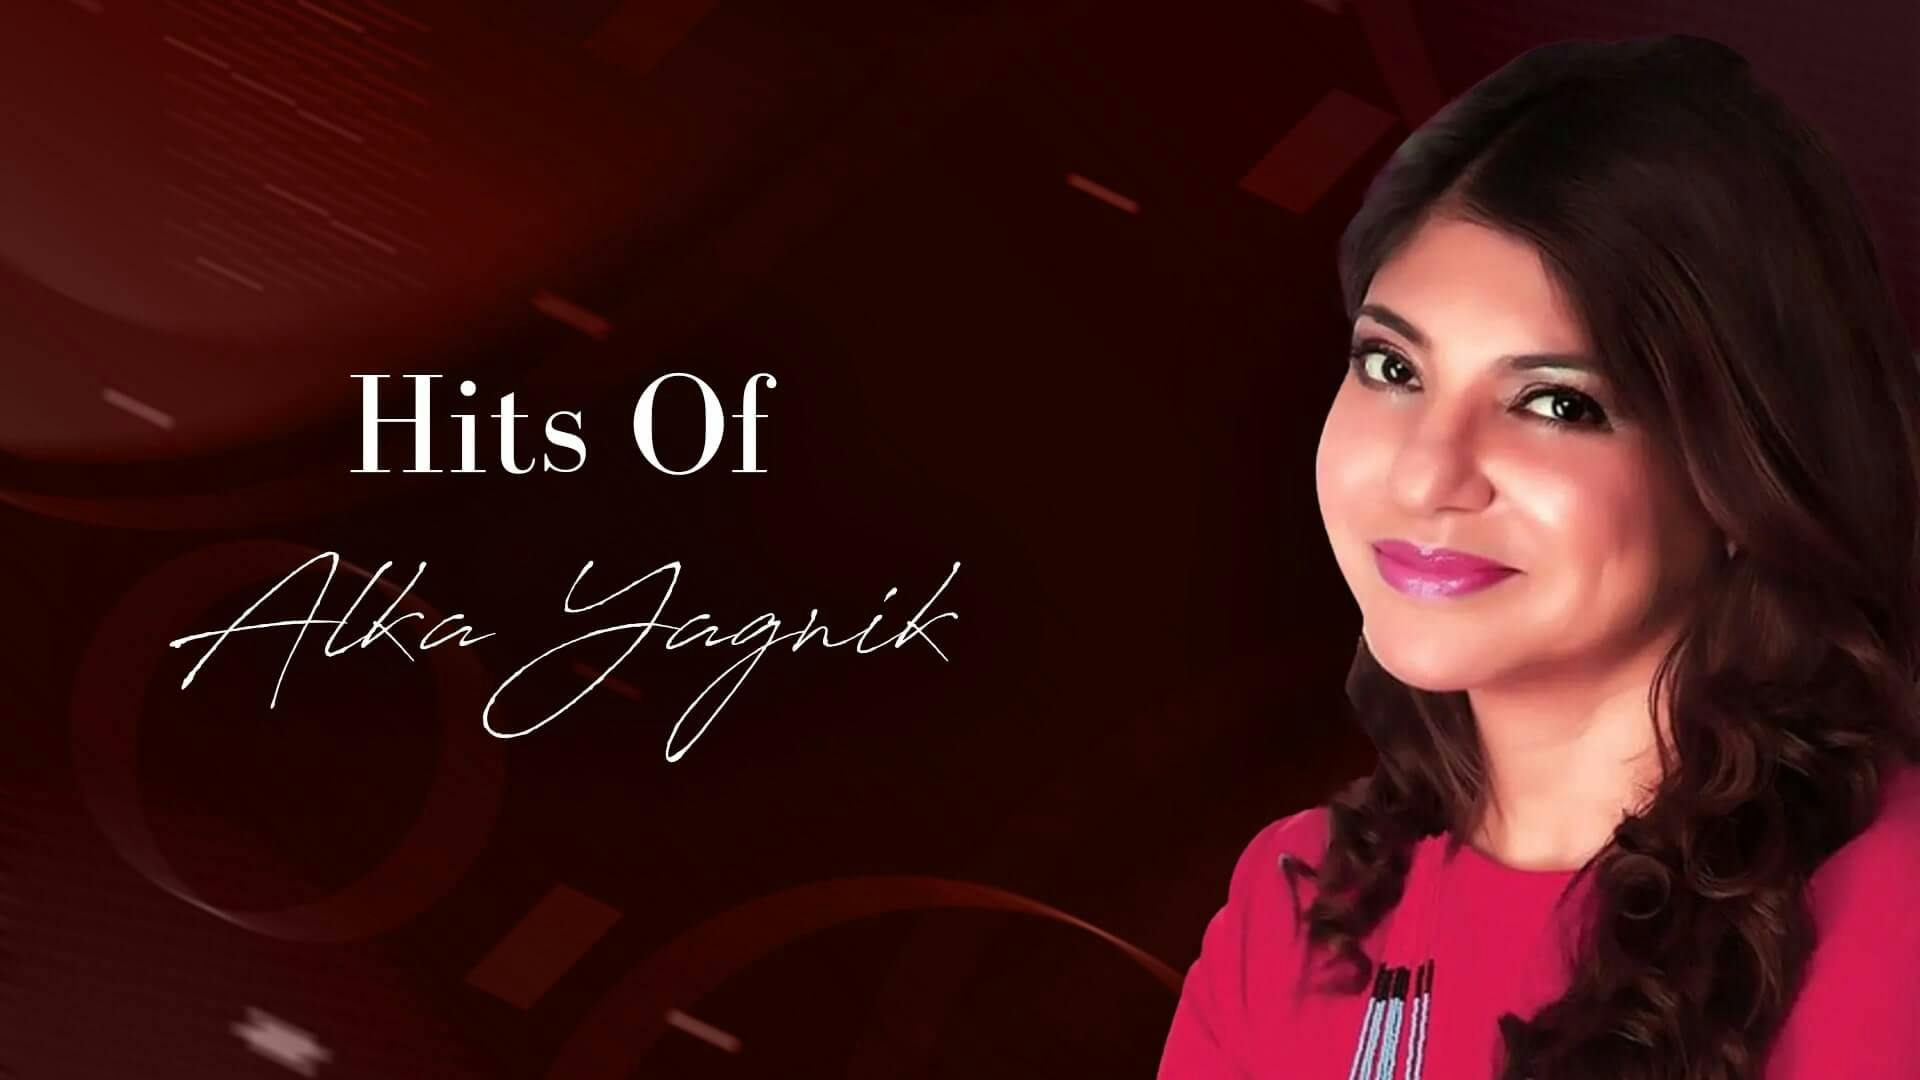 Cover Image for List Of Alka Yagnik Songs – 2021 Updates